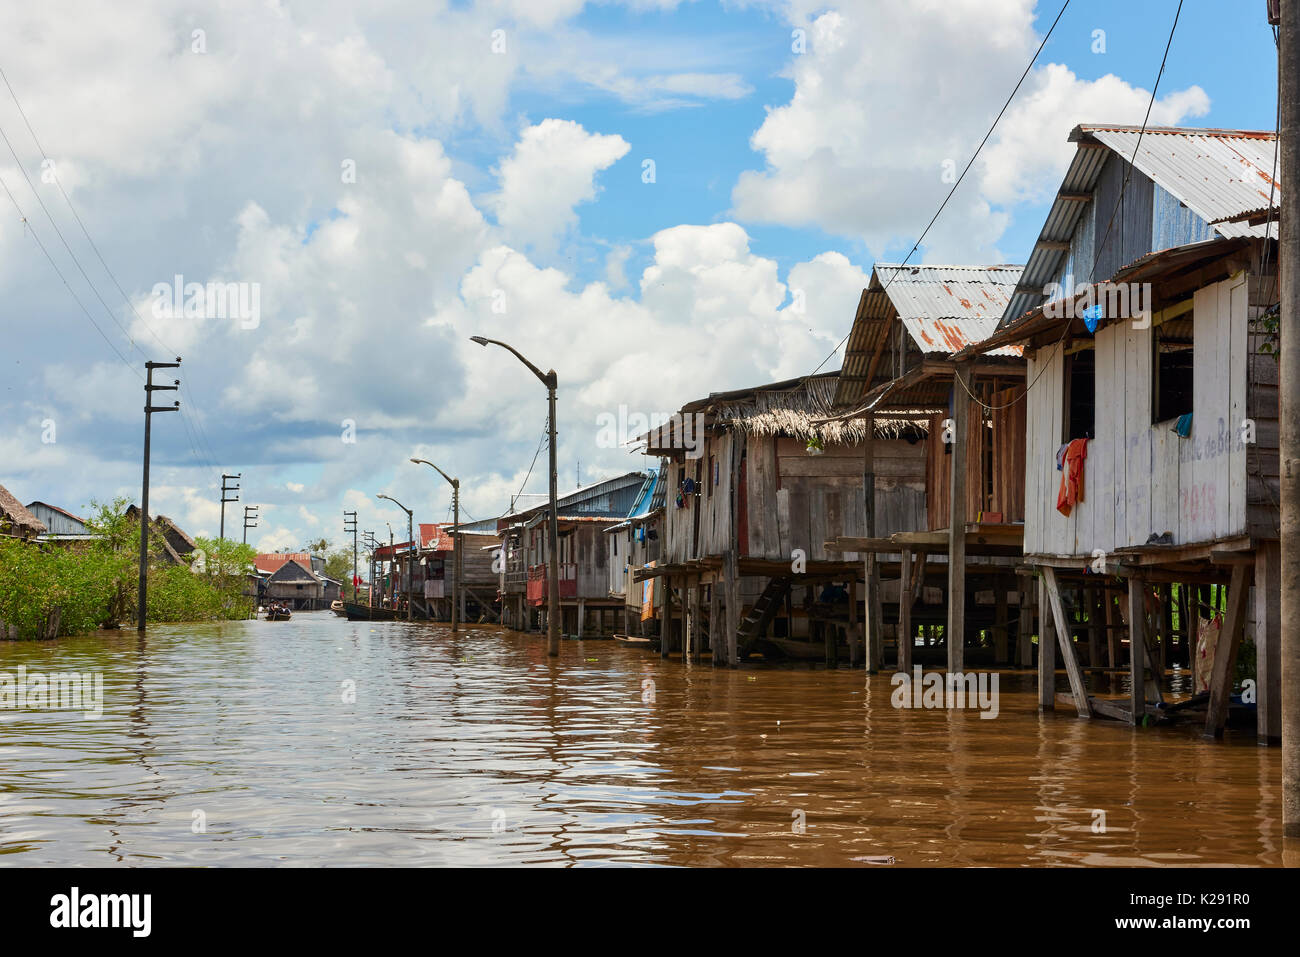 Wooden houses on sticks in flooded area of Belem, Iquitos, Peru. The district is poor and populated by indigenous people who moved to the city. Stock Photo